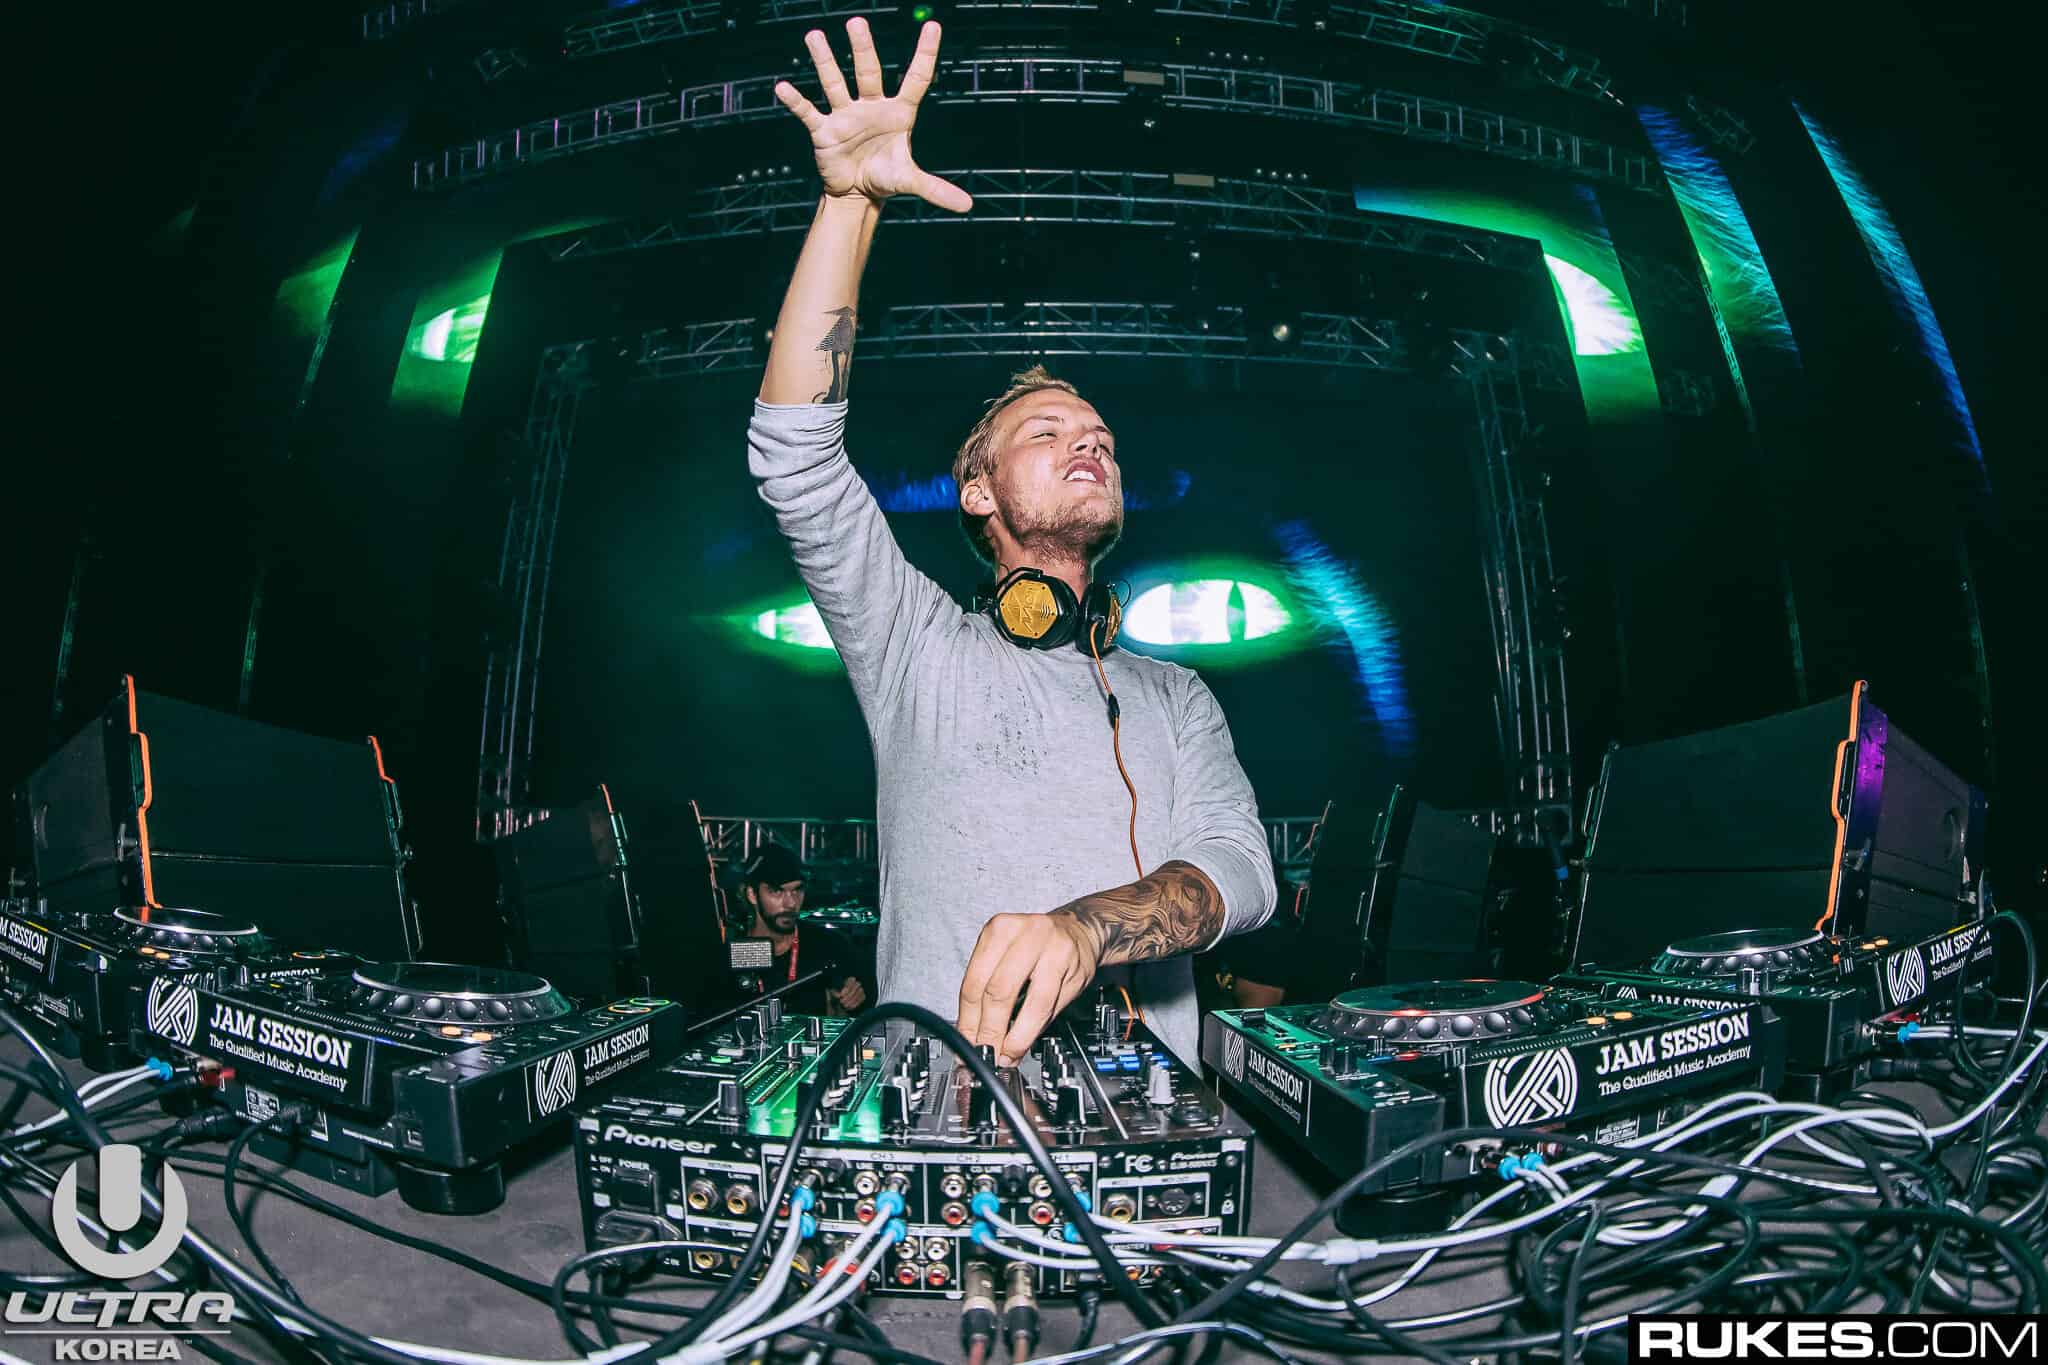 Avicii’s genre altering song ‘Wake Me Up’ with Aloe Blacc turns 9 years old